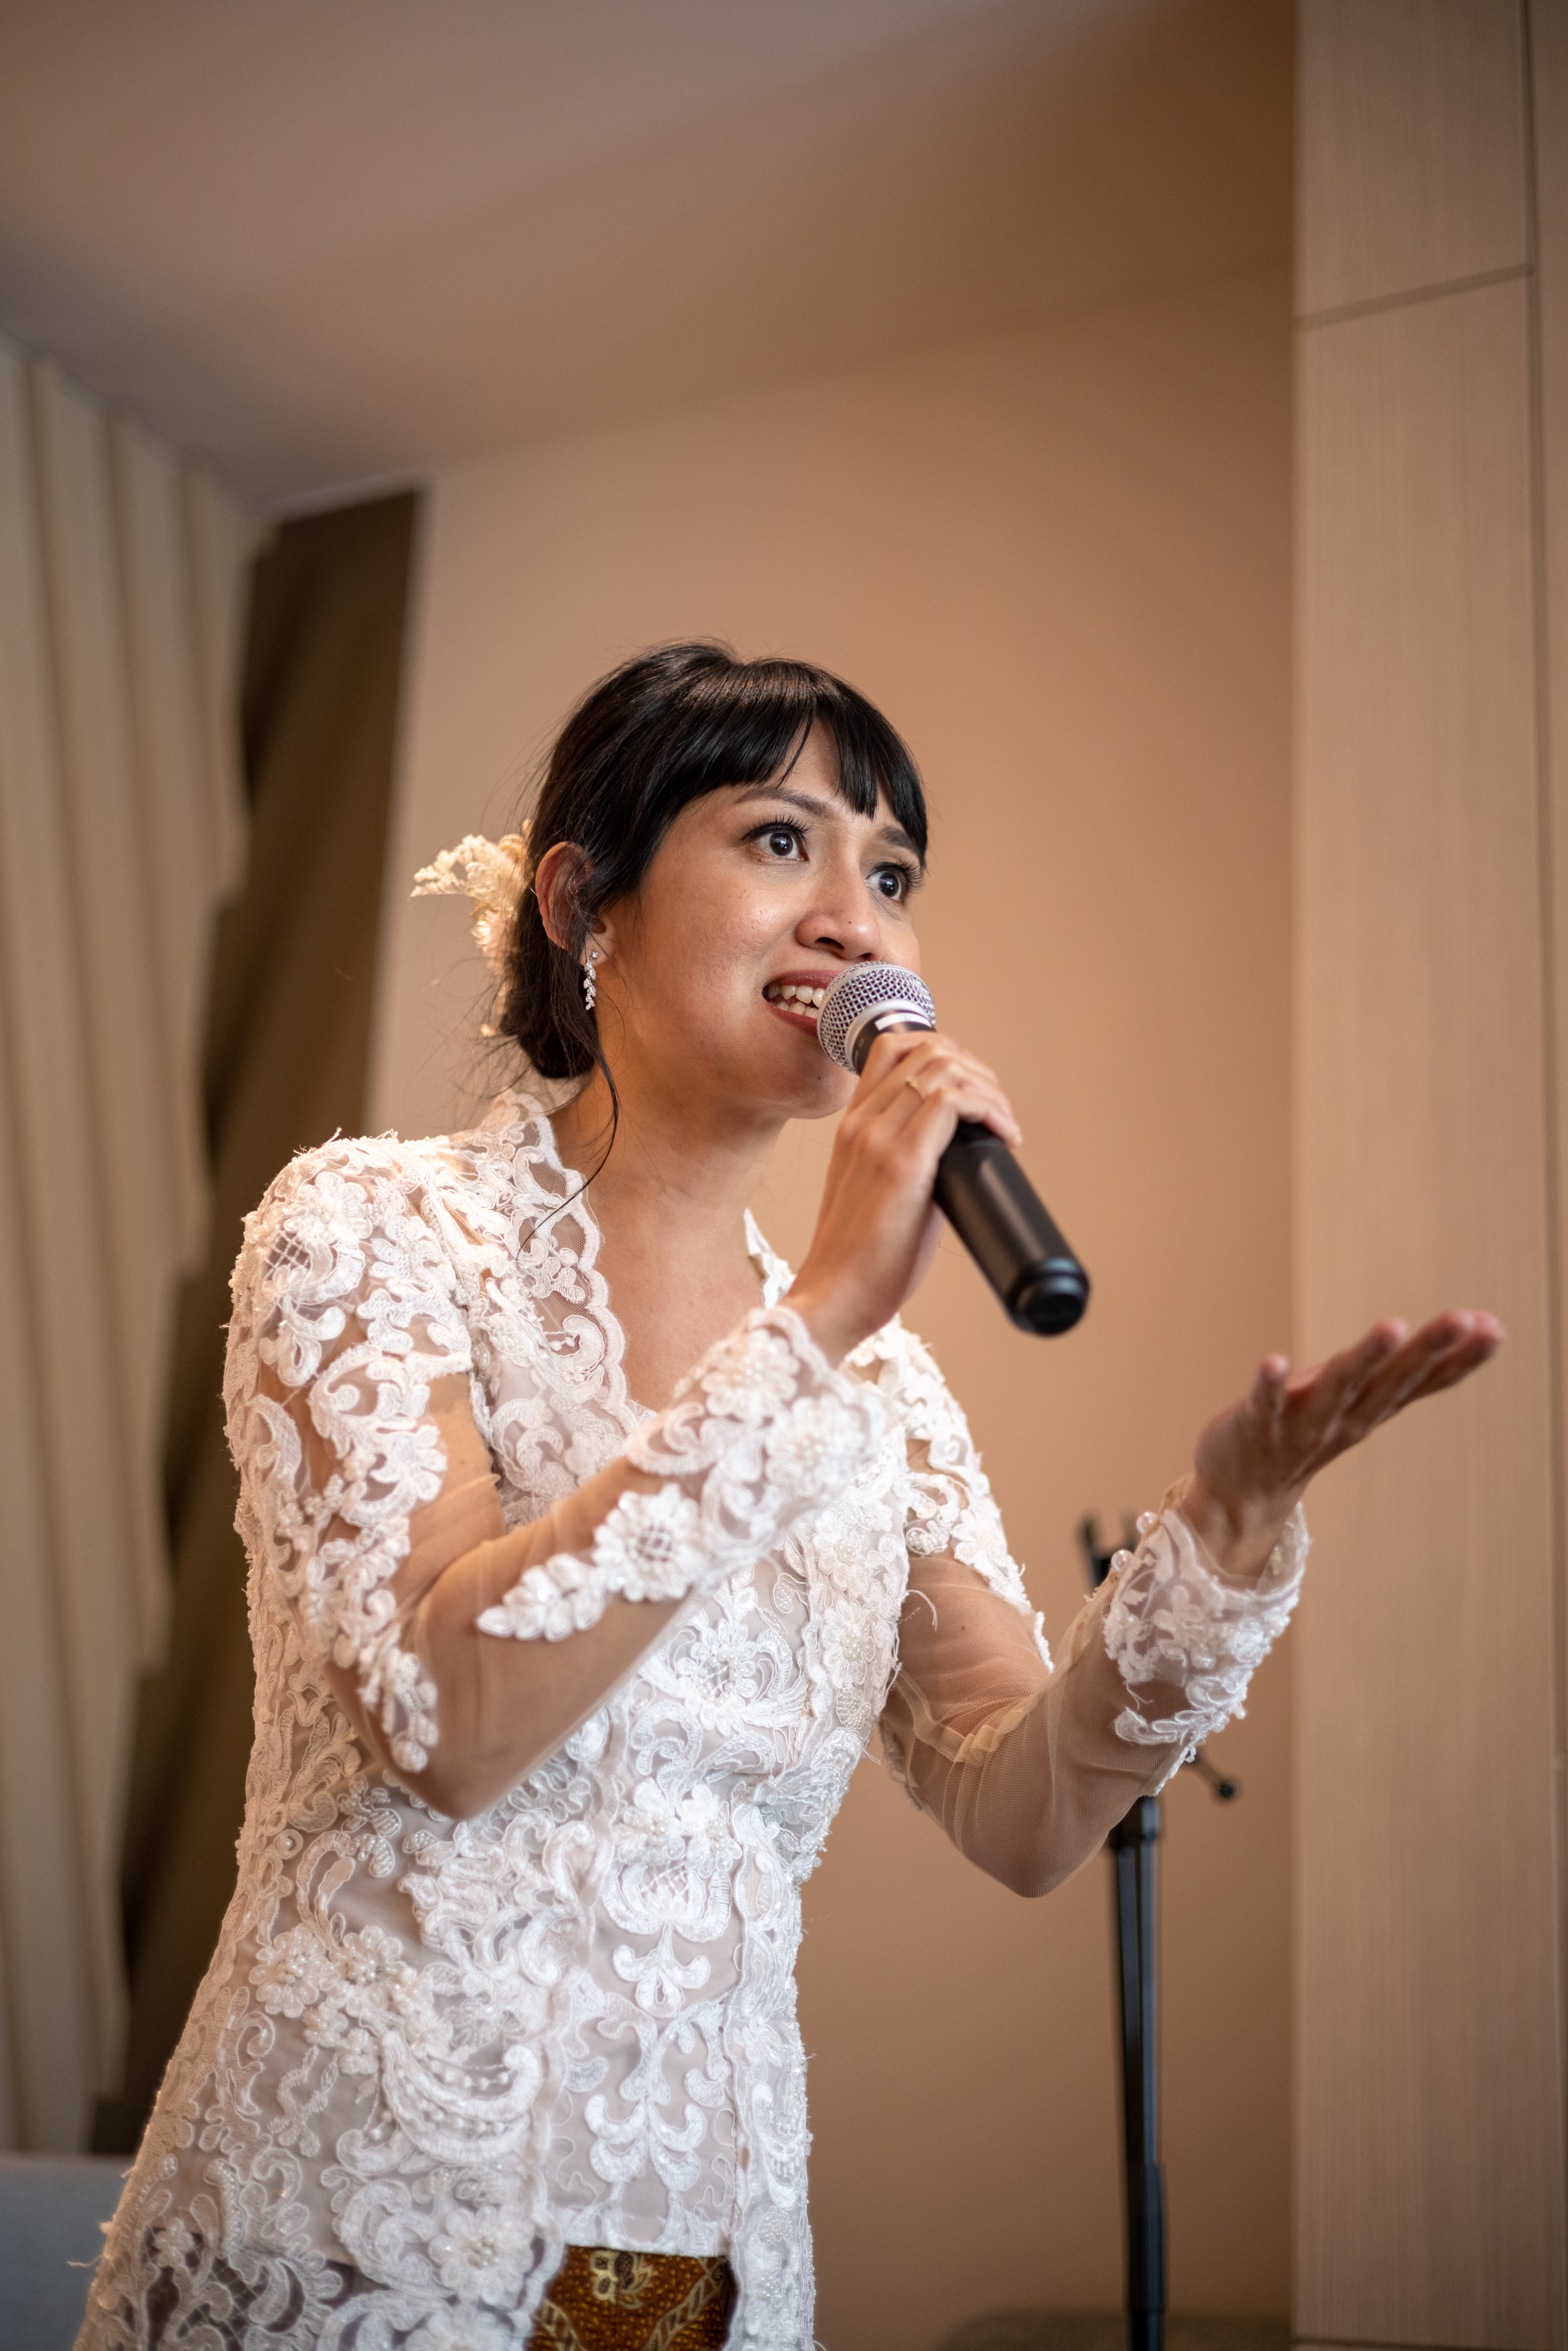 A woman speaking at a wedding | Source: Getty Images